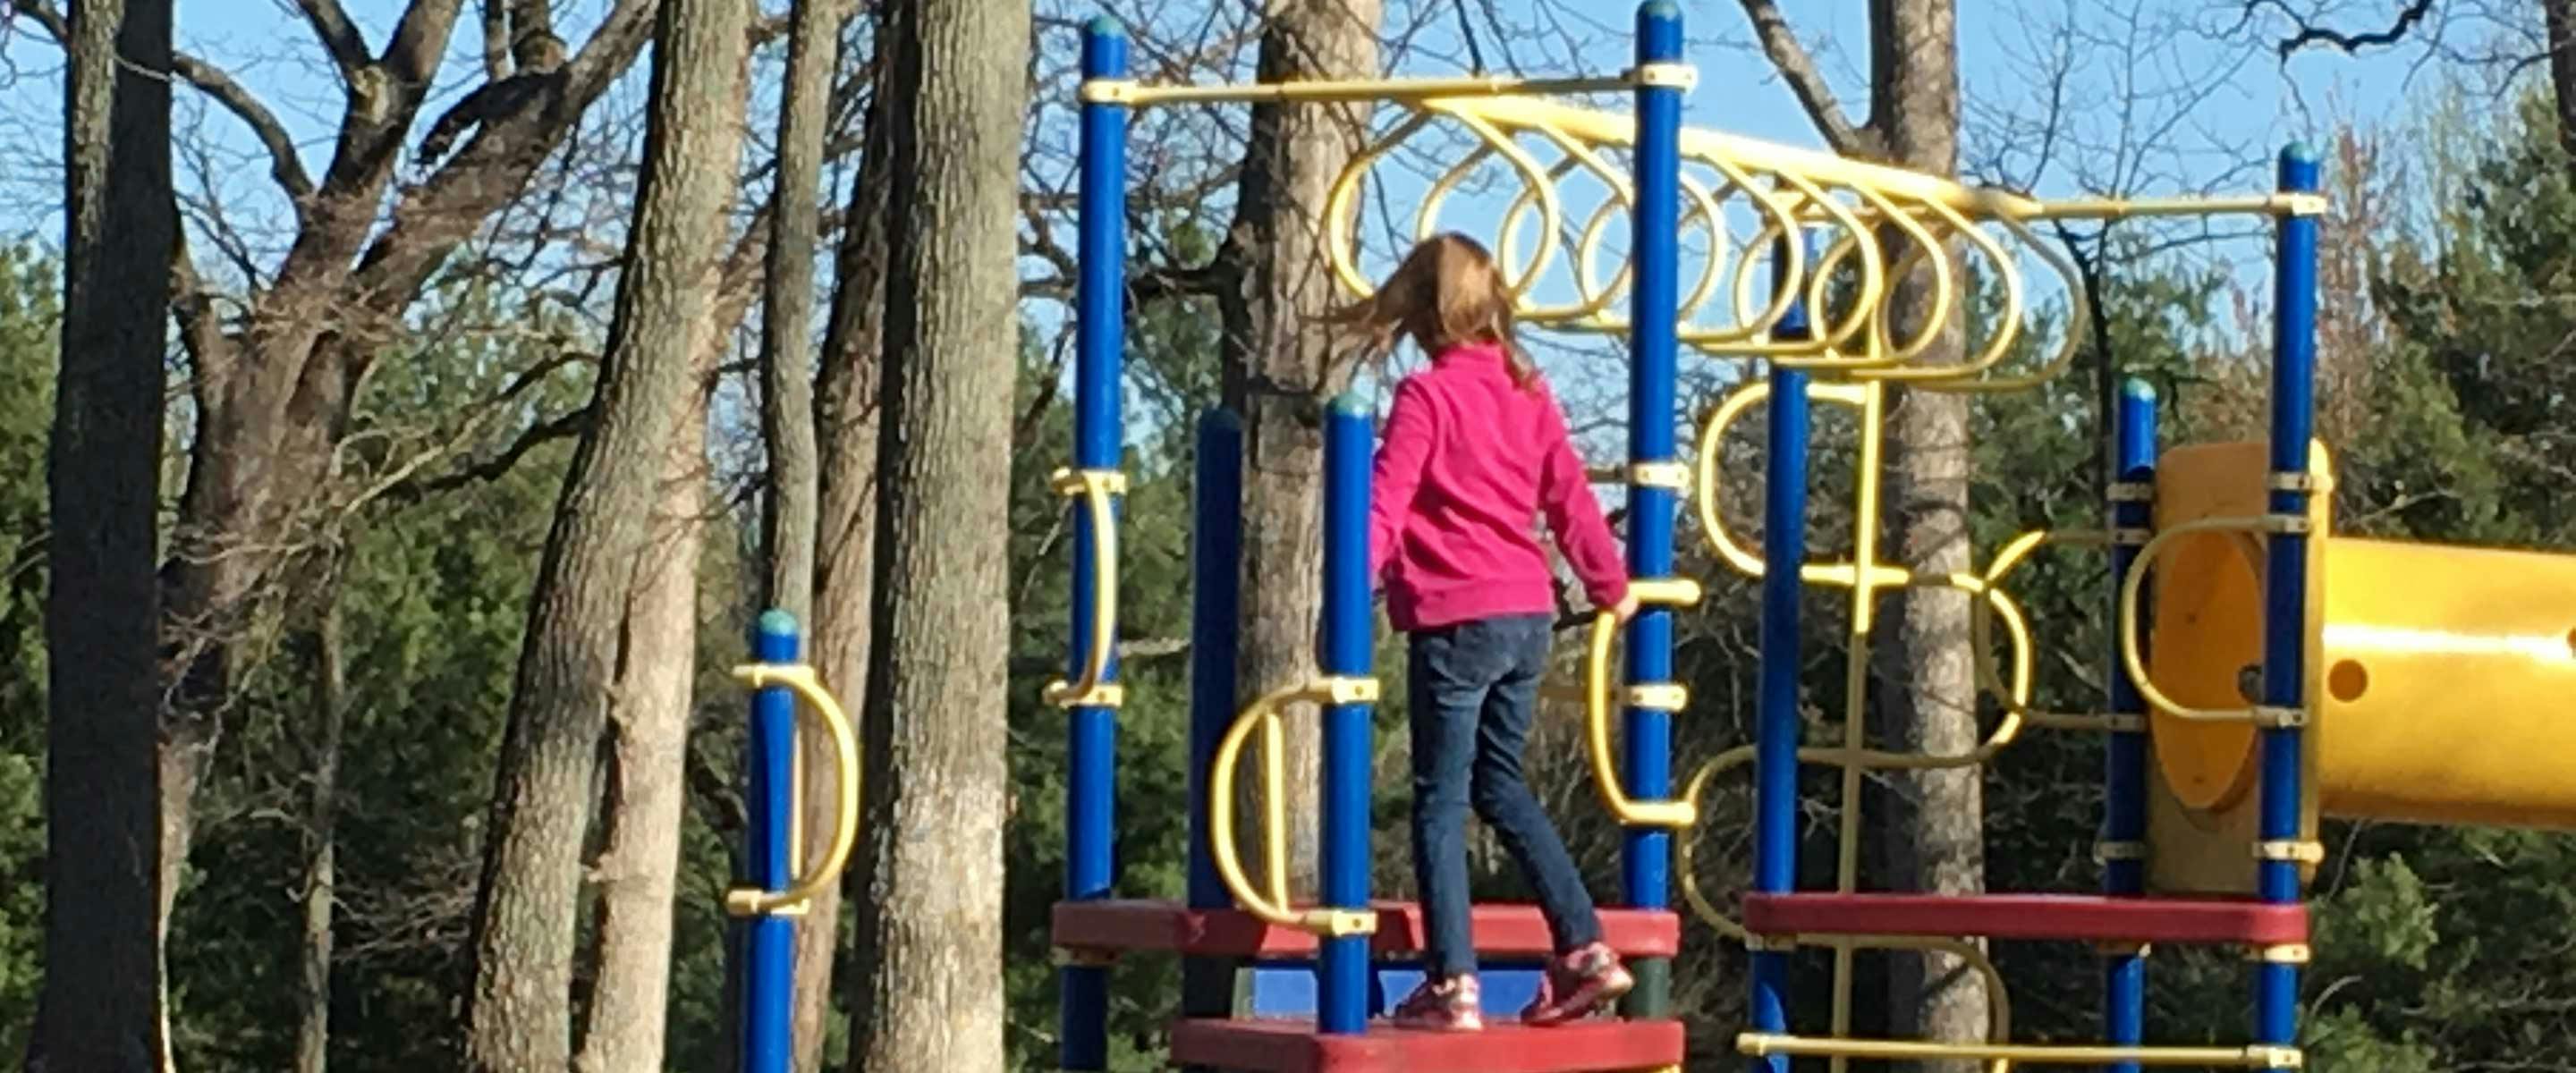 girl playing on nearby playfround equipment